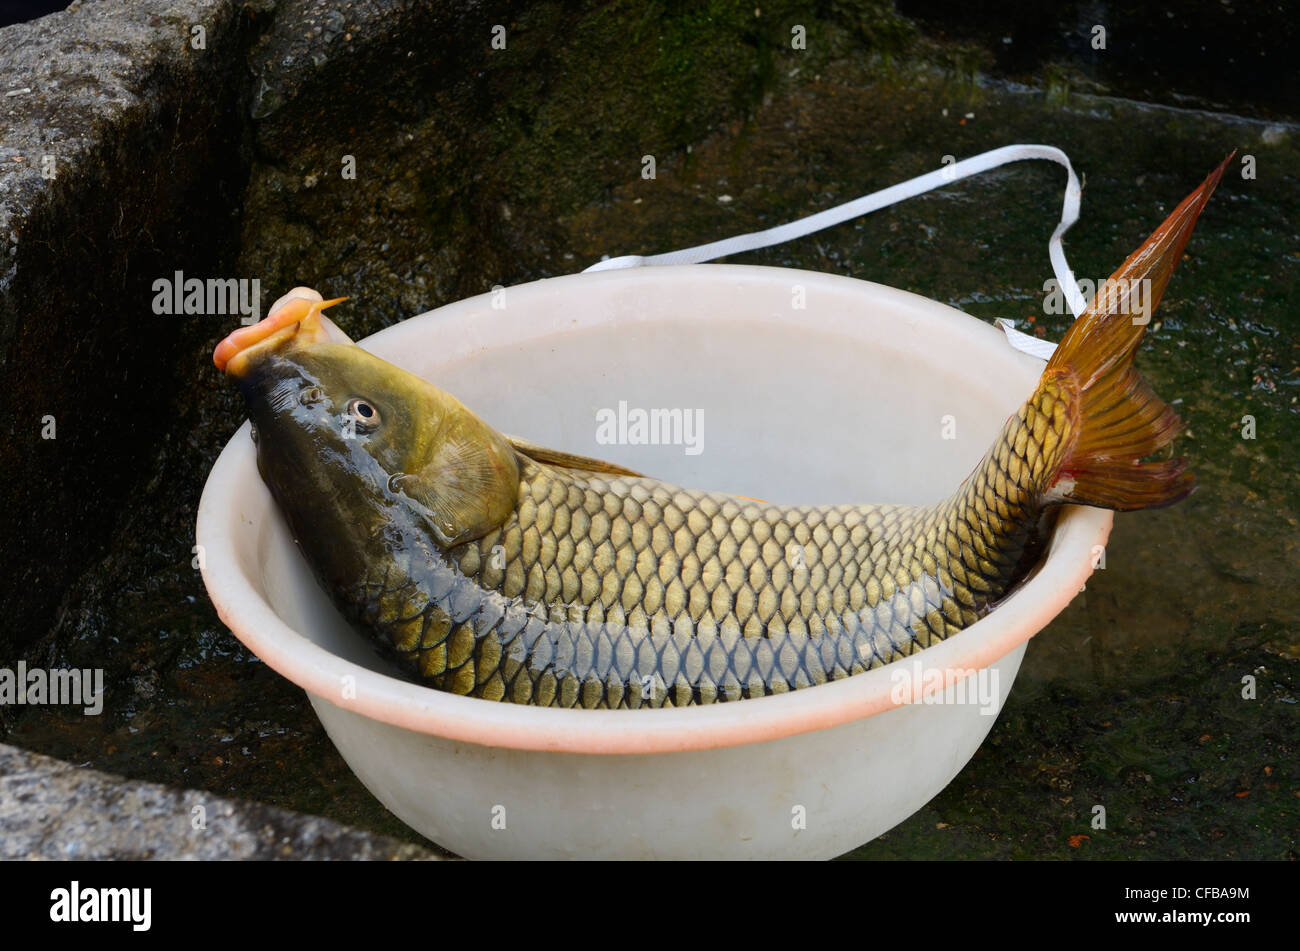 Fresh caught live carp fish in Shangshe village on Fengle Lake Huangshan Peoples Republic of China Stock Photo